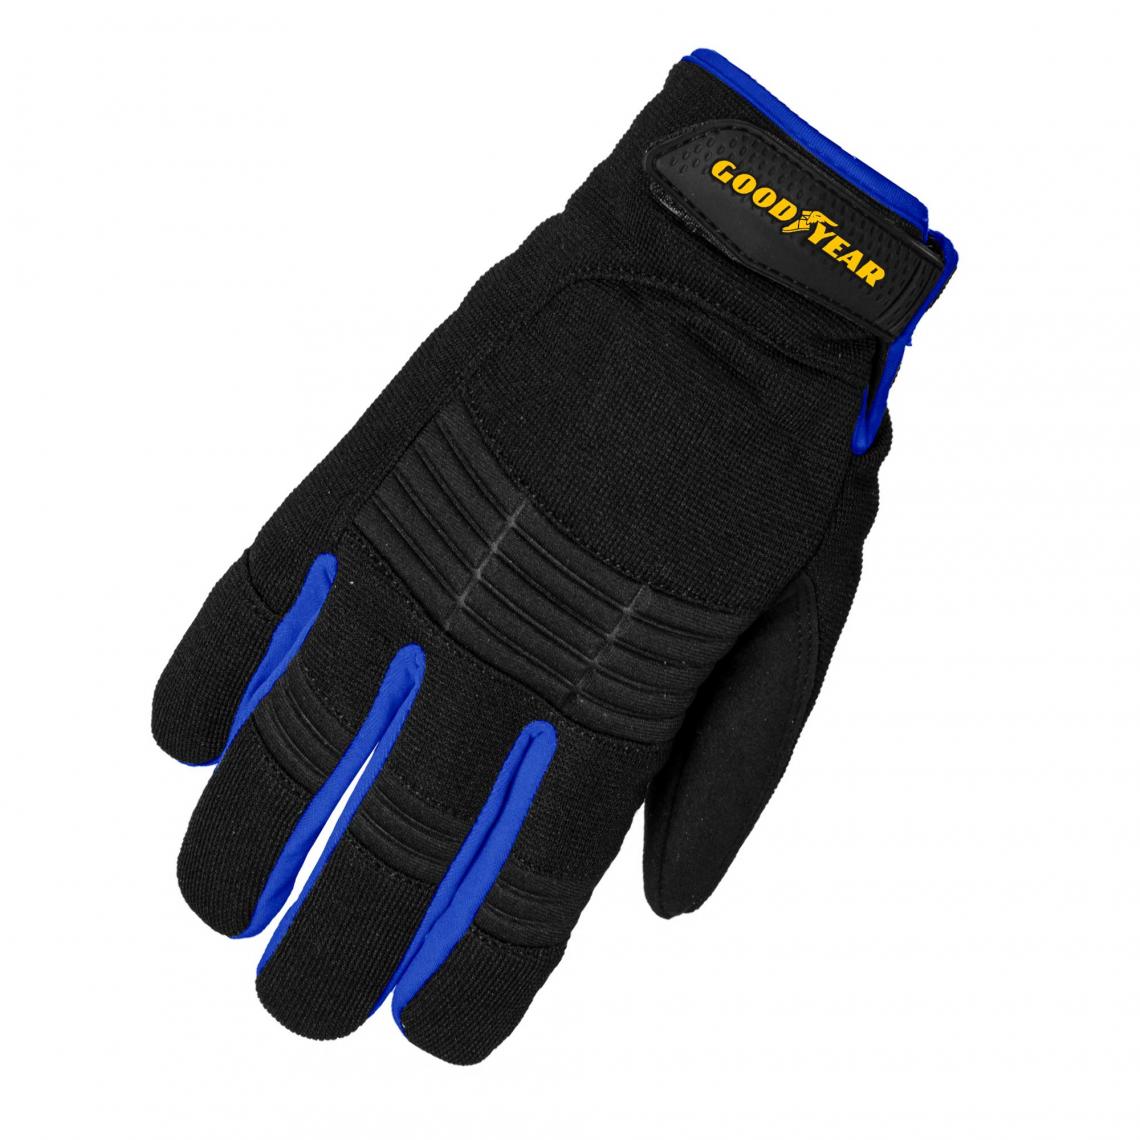 Goodyear High Performance Thinsulate Lined Winter Work Gloves Work Gloves and Hats - Cleanflow